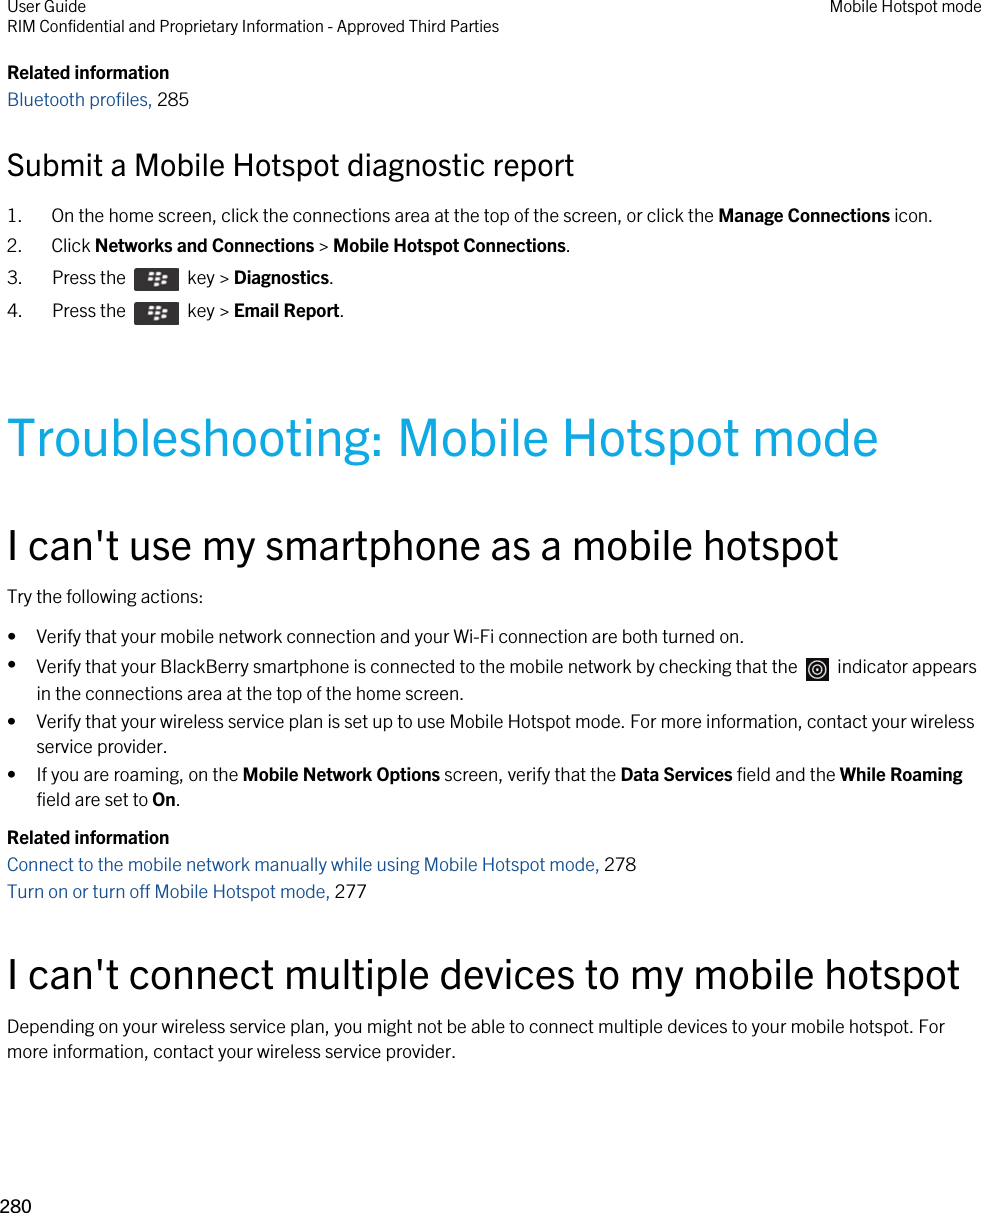 Related informationBluetooth profiles, 285Submit a Mobile Hotspot diagnostic report1. On the home screen, click the connections area at the top of the screen, or click the Manage Connections icon.2. Click Networks and Connections &gt; Mobile Hotspot Connections.3.  Press the    key &gt; Diagnostics.4.  Press the    key &gt; Email Report.Troubleshooting: Mobile Hotspot modeI can&apos;t use my smartphone as a mobile hotspotTry the following actions:• Verify that your mobile network connection and your Wi-Fi connection are both turned on.•Verify that your BlackBerry smartphone is connected to the mobile network by checking that the    indicator appears in the connections area at the top of the home screen.• Verify that your wireless service plan is set up to use Mobile Hotspot mode. For more information, contact your wireless service provider.• If you are roaming, on the Mobile Network Options screen, verify that the Data Services field and the While Roaming field are set to On.Related informationConnect to the mobile network manually while using Mobile Hotspot mode, 278 Turn on or turn off Mobile Hotspot mode, 277 I can&apos;t connect multiple devices to my mobile hotspotDepending on your wireless service plan, you might not be able to connect multiple devices to your mobile hotspot. For more information, contact your wireless service provider.User GuideRIM Confidential and Proprietary Information - Approved Third Parties Mobile Hotspot mode280 